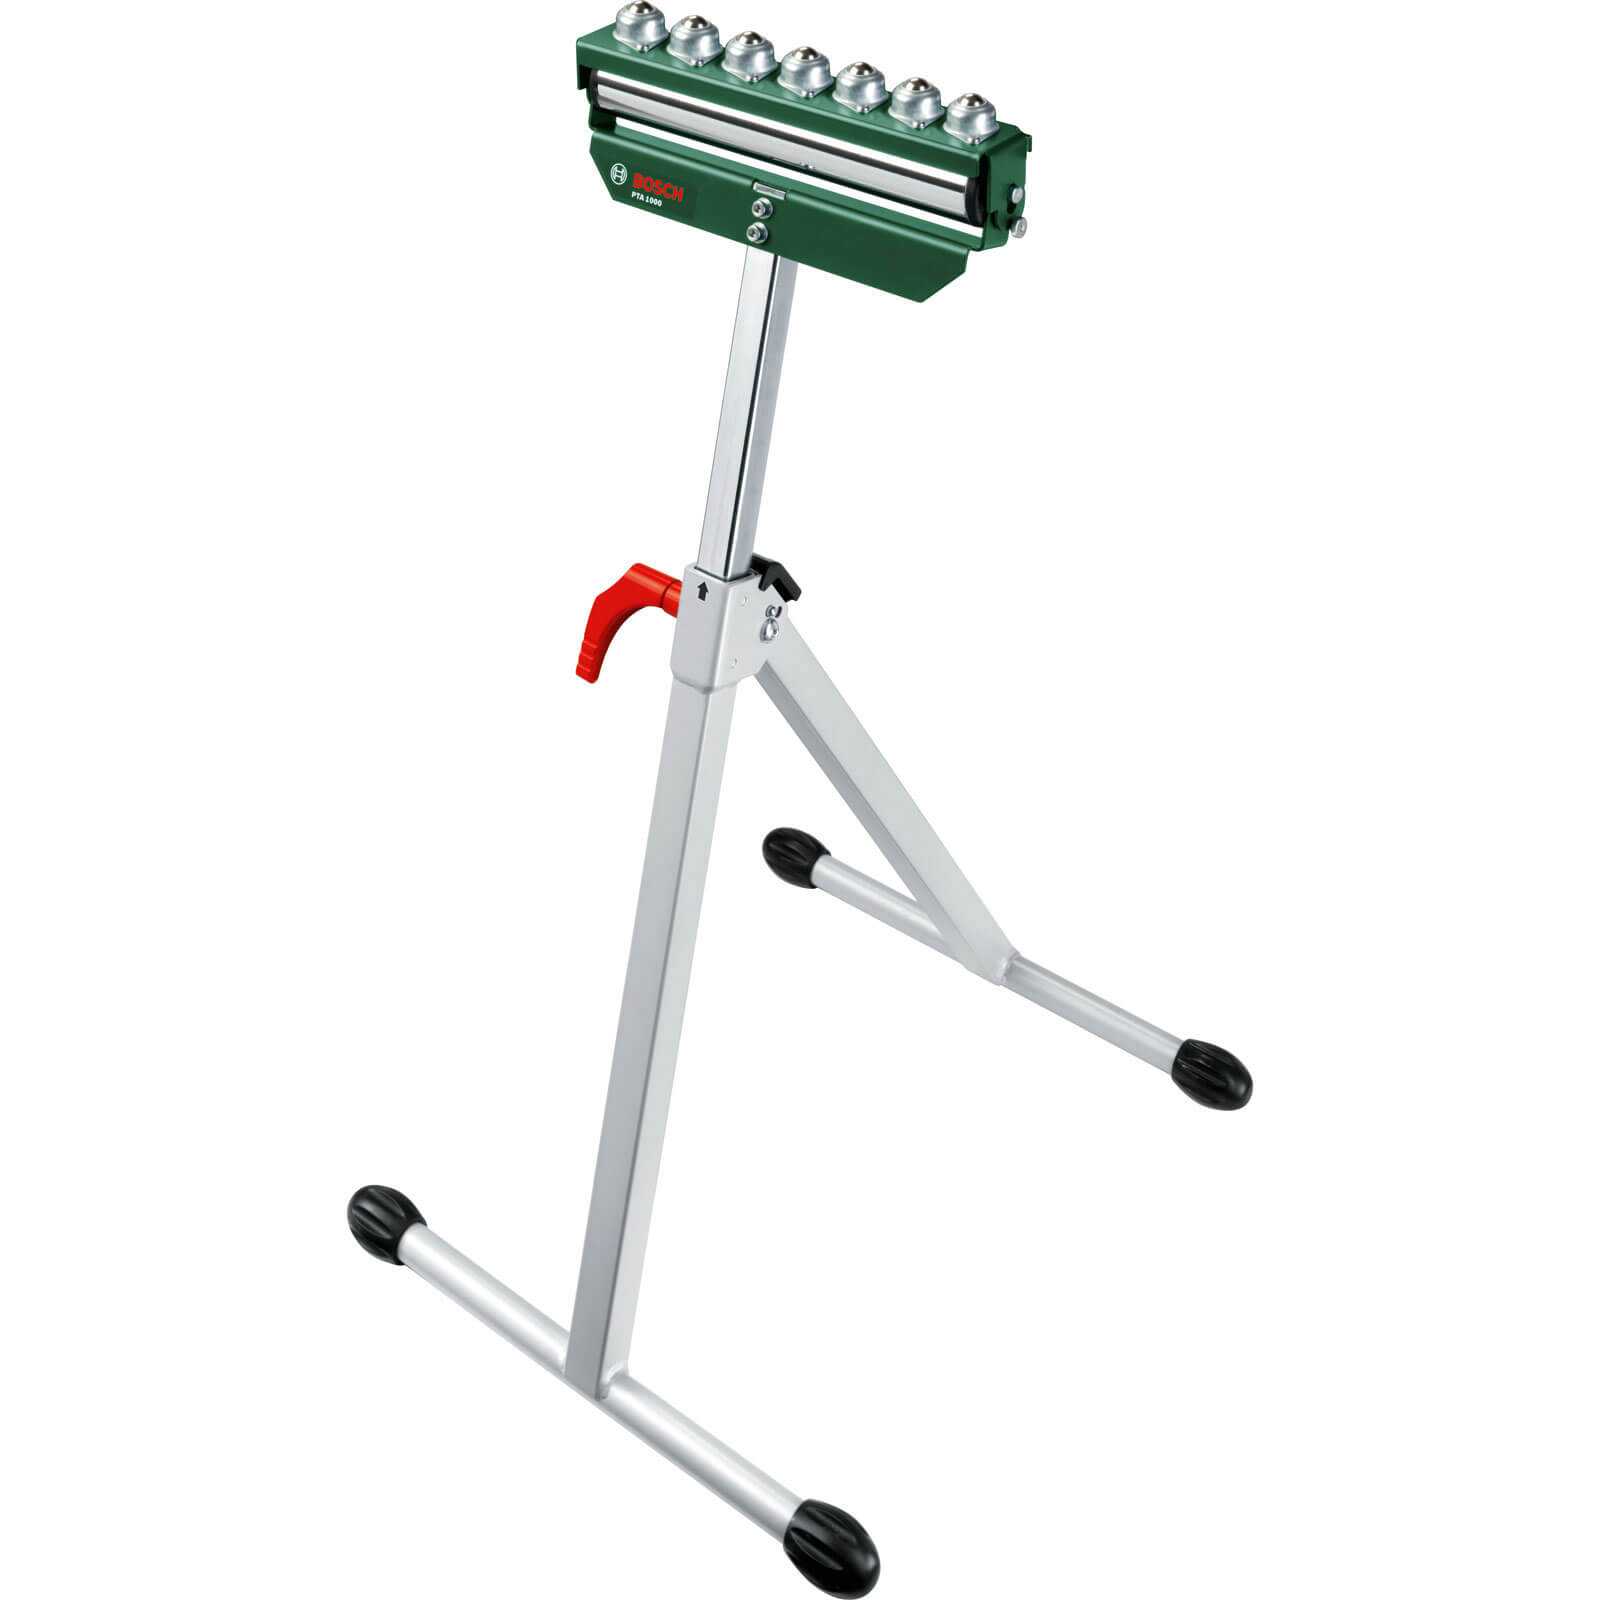 Bosch PTA 1000 Roller Support Stand for Cutting Wood